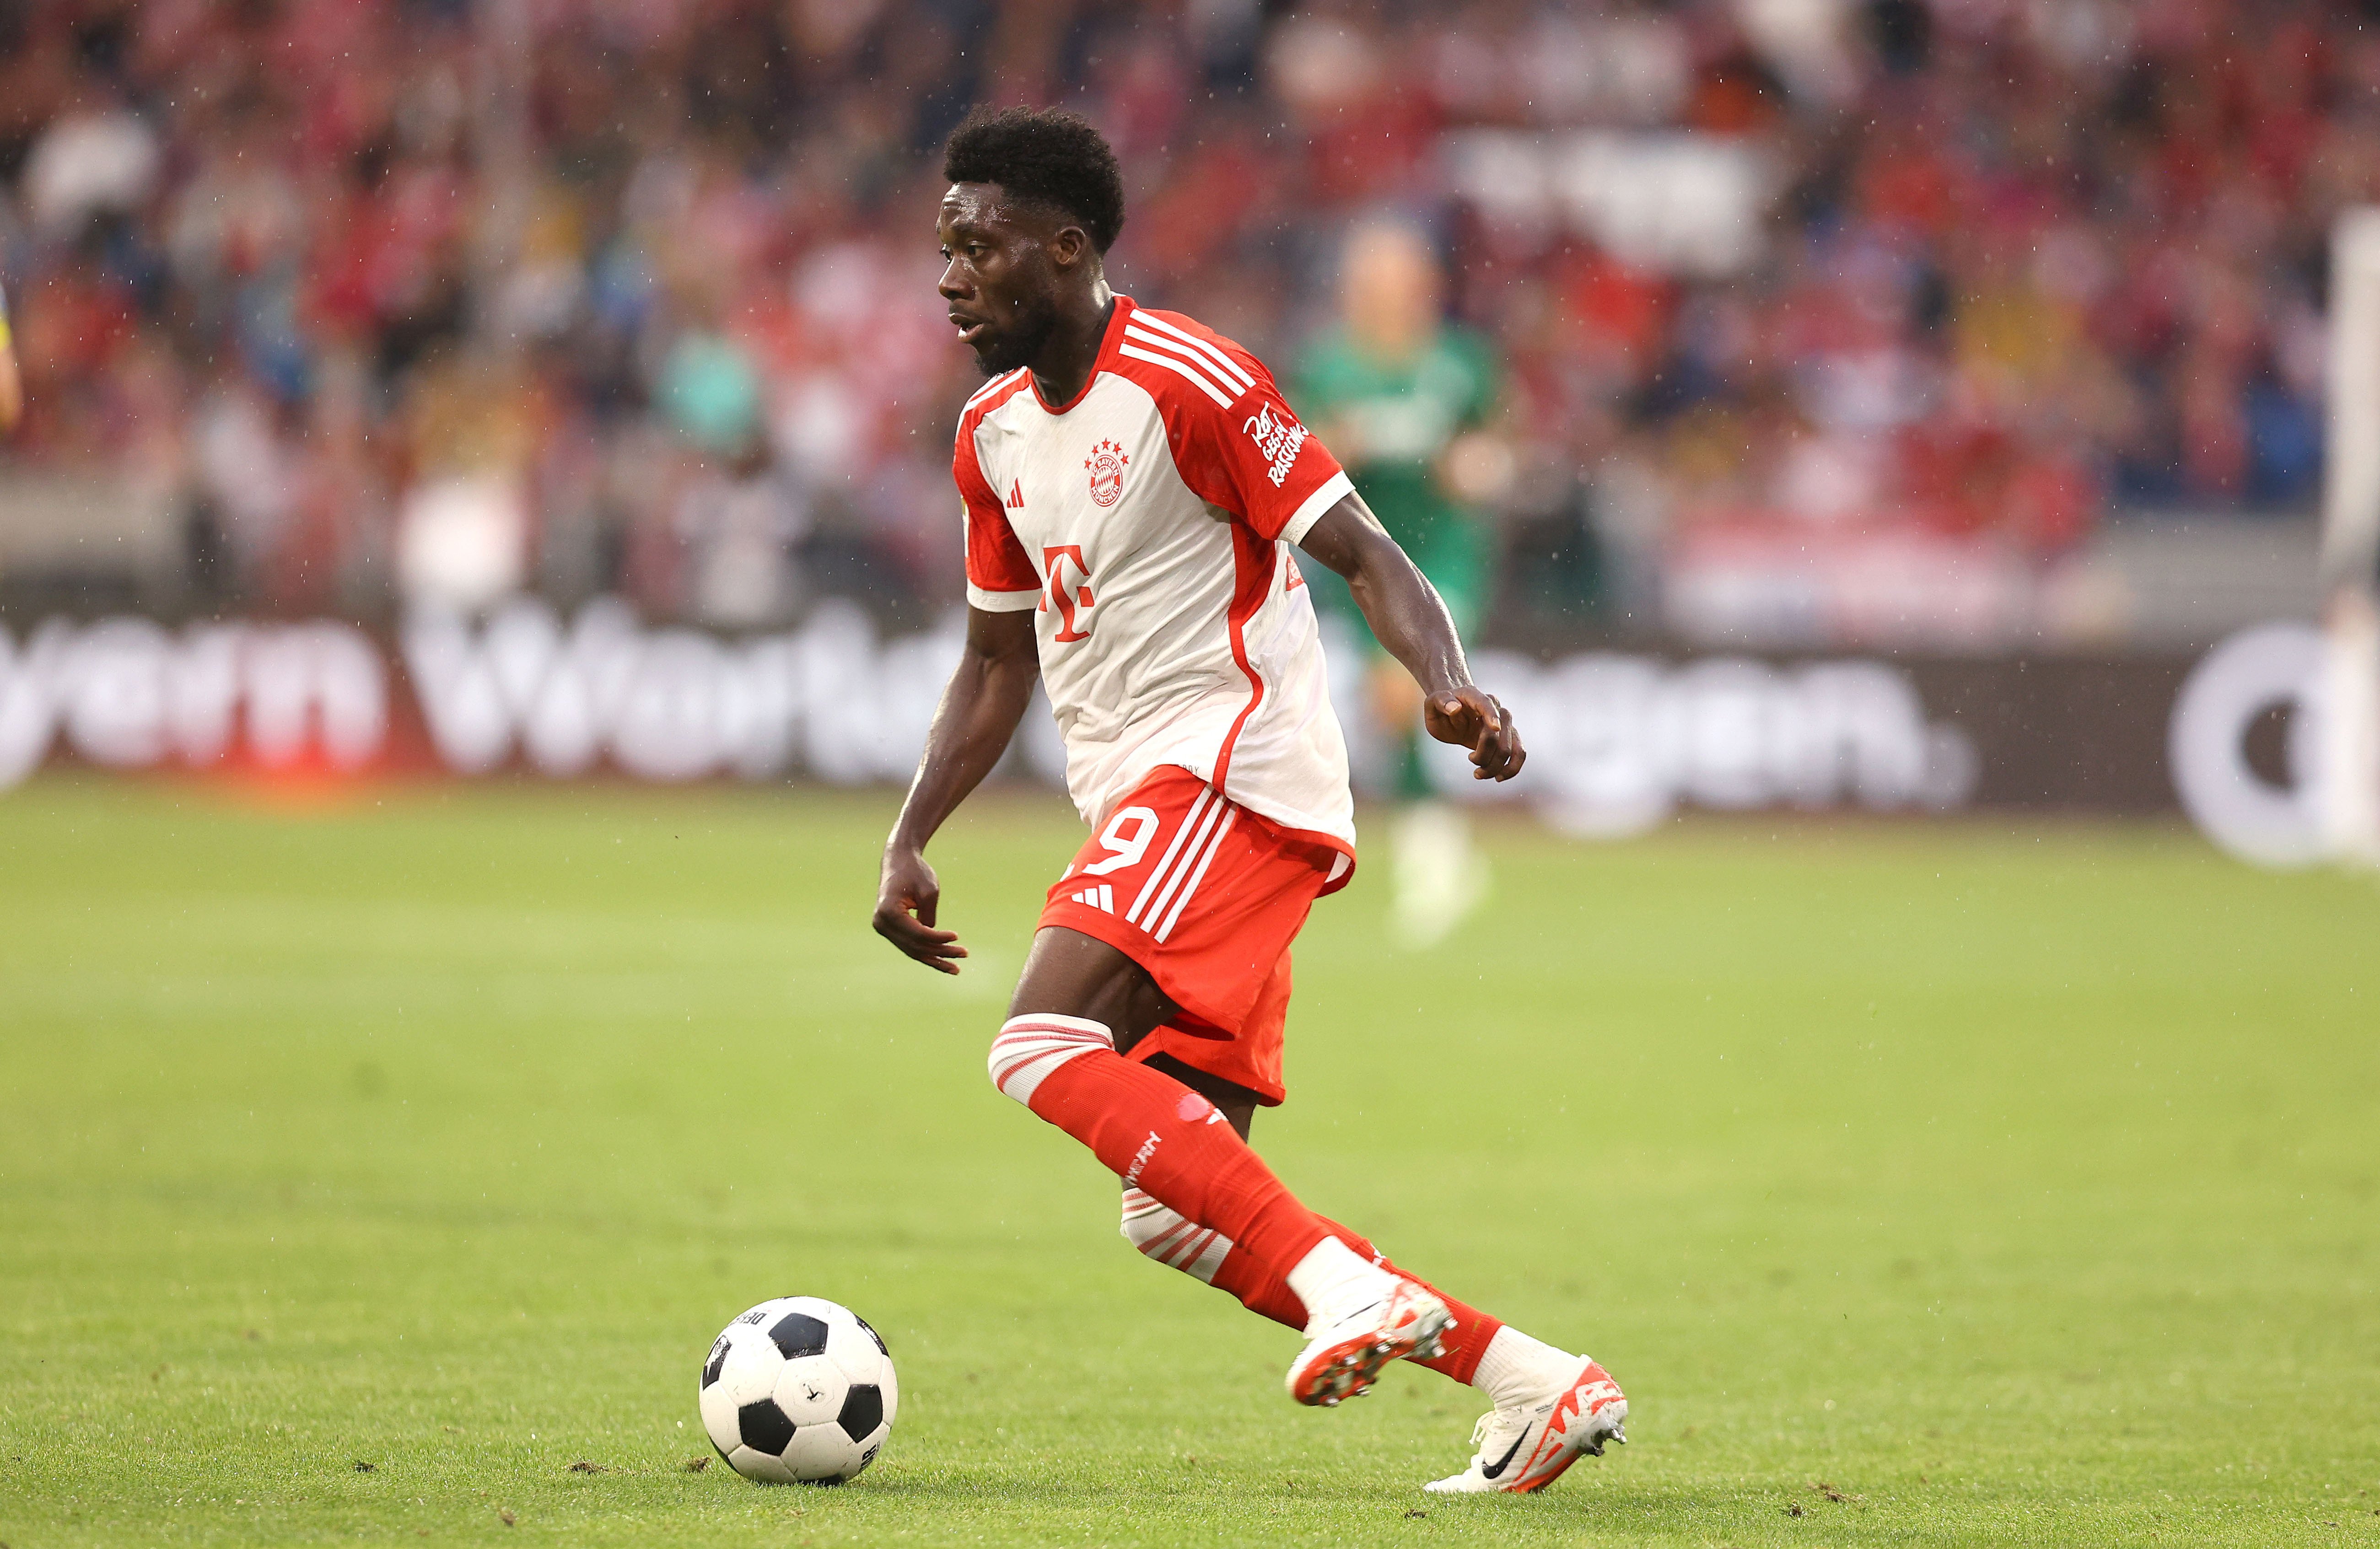 Real Madrid devise €30m plan to sign Alphonso Davies this summer